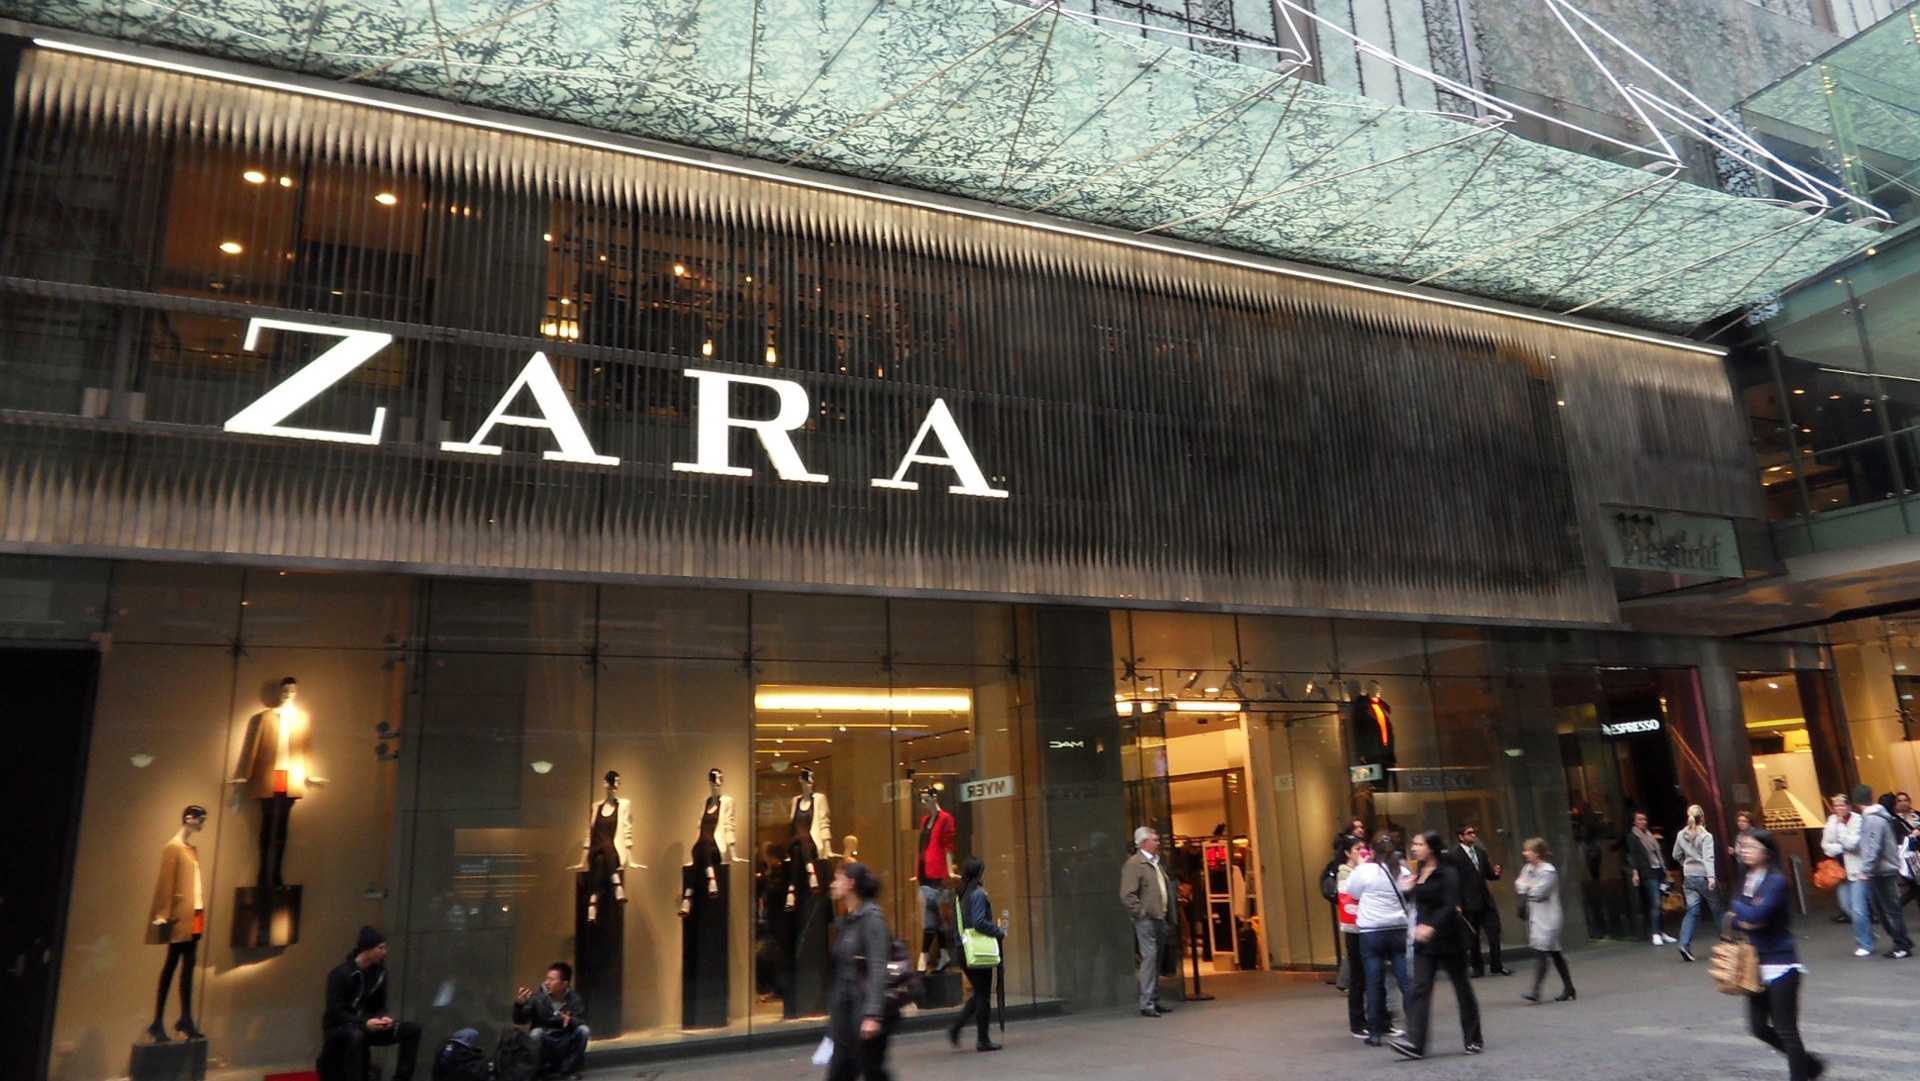 Unpaid Zara Employees Left Notes For The Public Within The Band’s Products